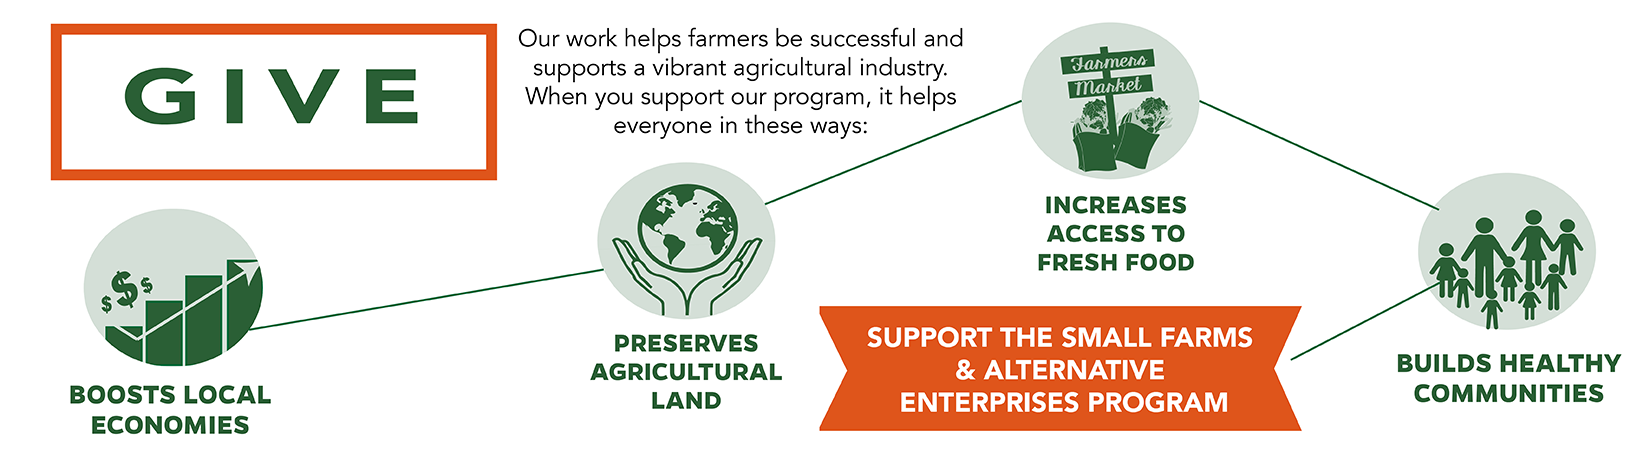 Give. Our work helps farmers be suiccessful and supports a vibrant agriculture industry. When you support our work, it helps everyone in these ways: 1-  Boost local economies 2- Preserves agricultural land 3- Increases access to fresh food 4- Builds healthy communities